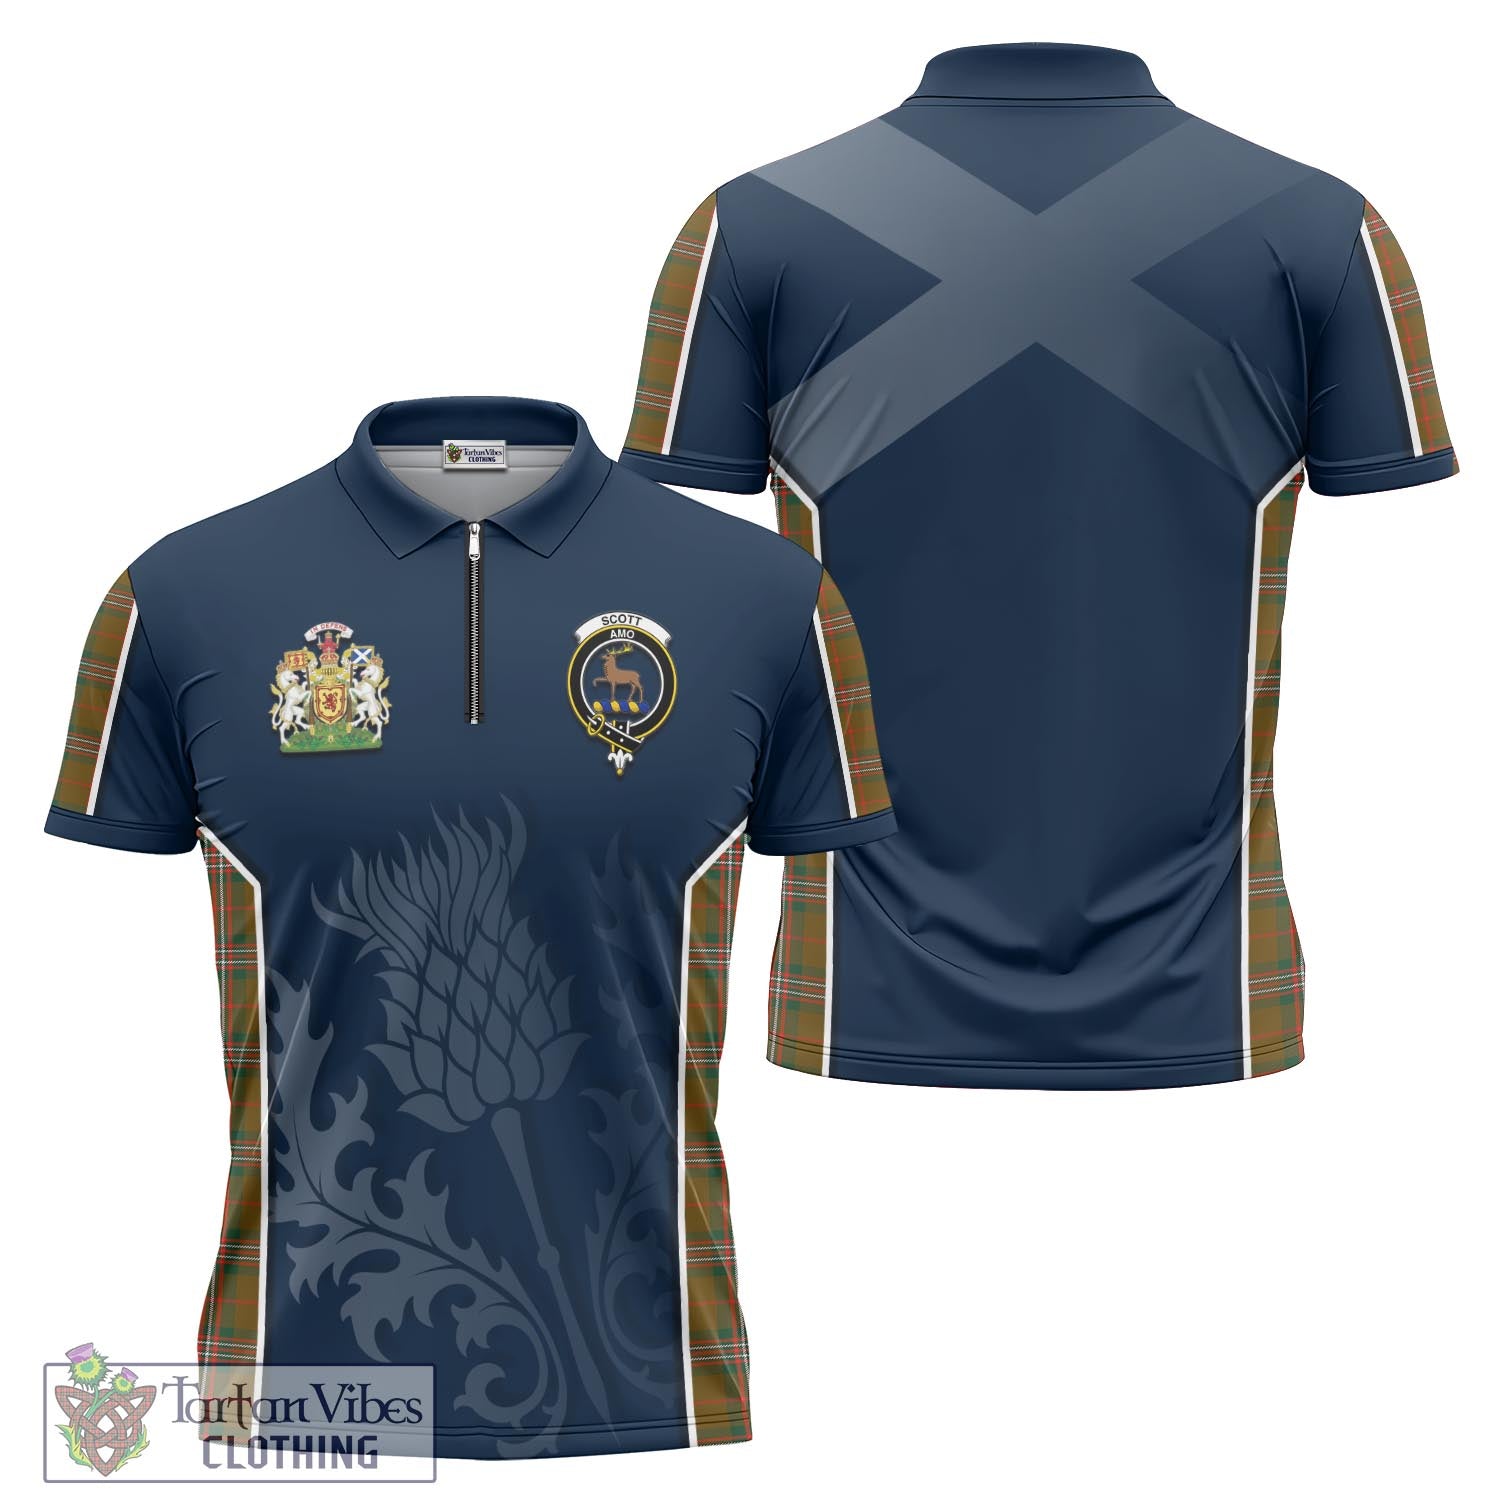 Tartan Vibes Clothing Scott Brown Modern Tartan Zipper Polo Shirt with Family Crest and Scottish Thistle Vibes Sport Style